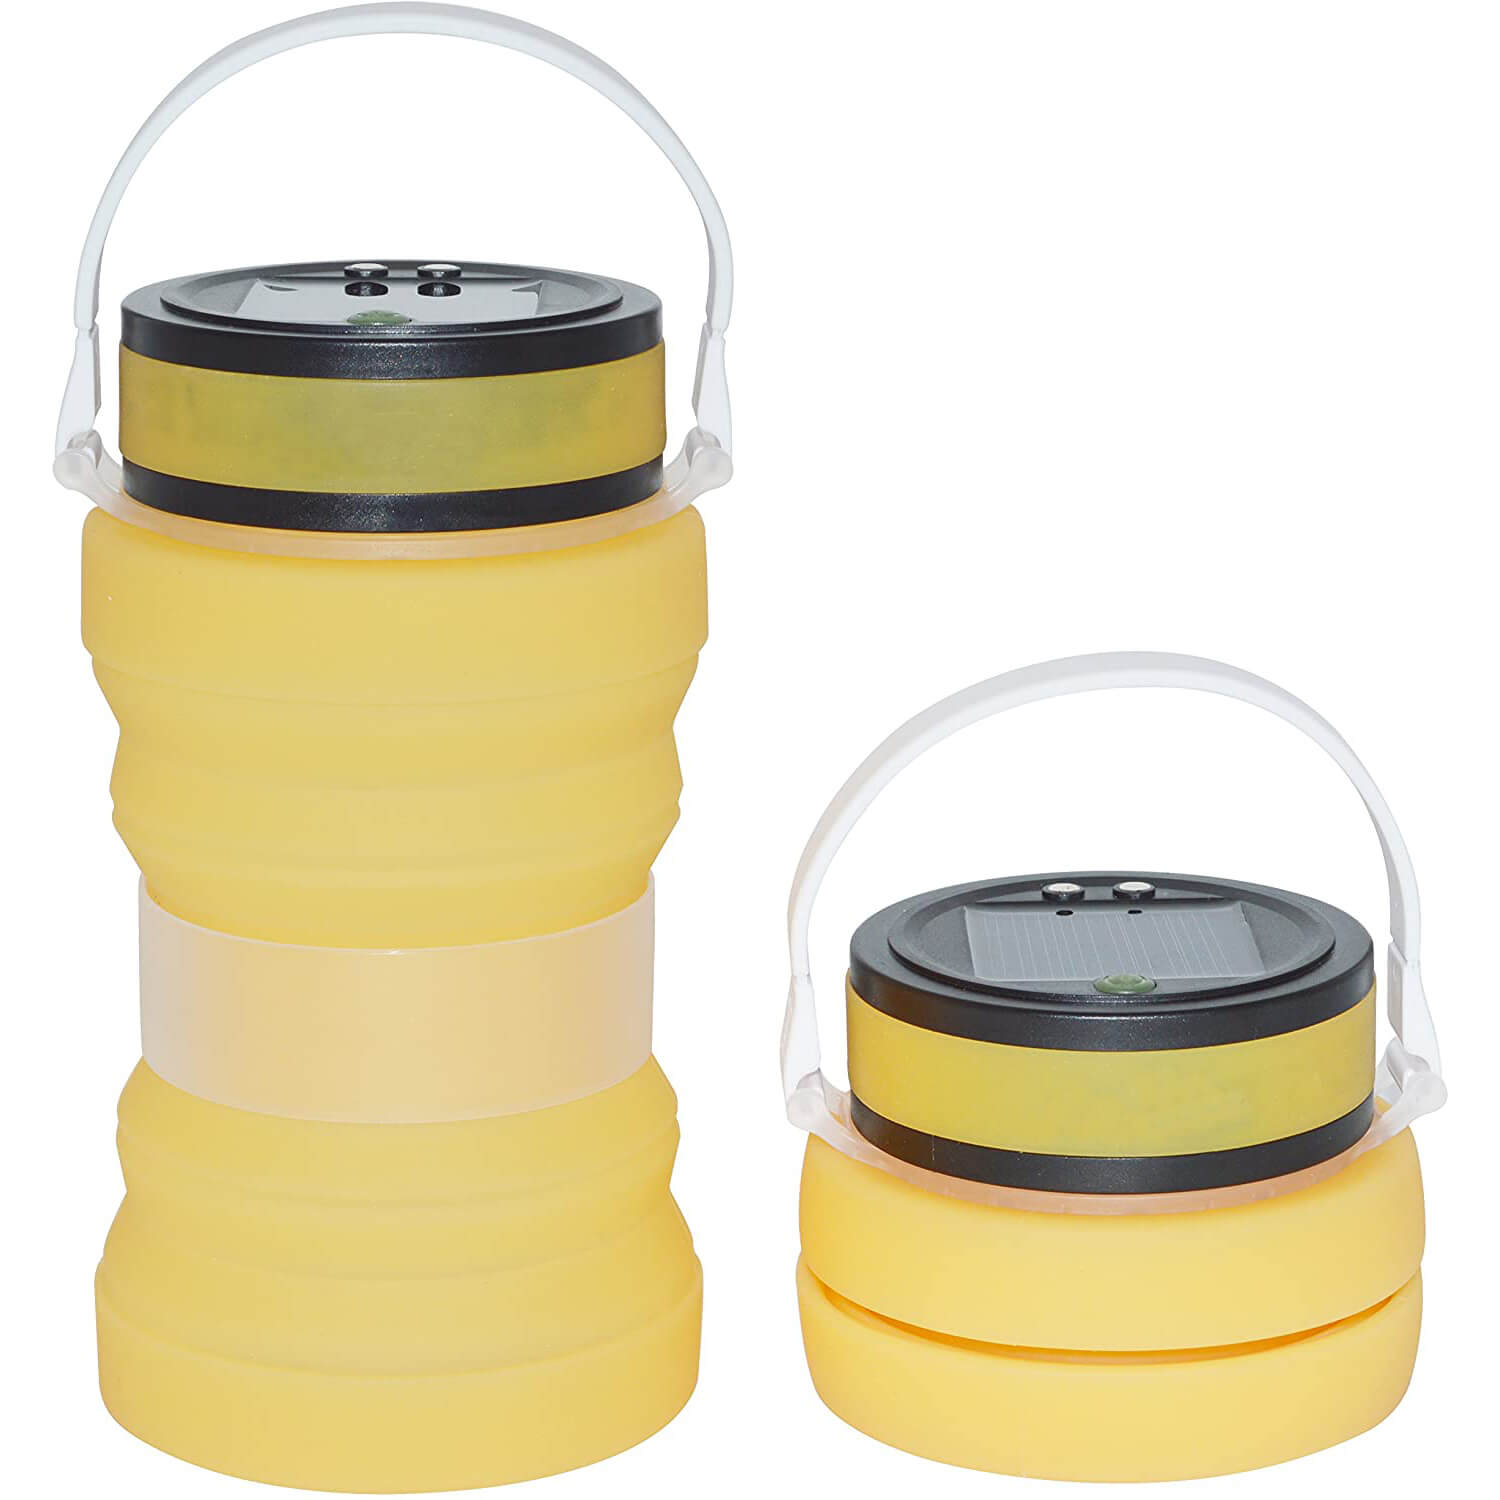 Auchee Collapsible Solar Camping Lantern